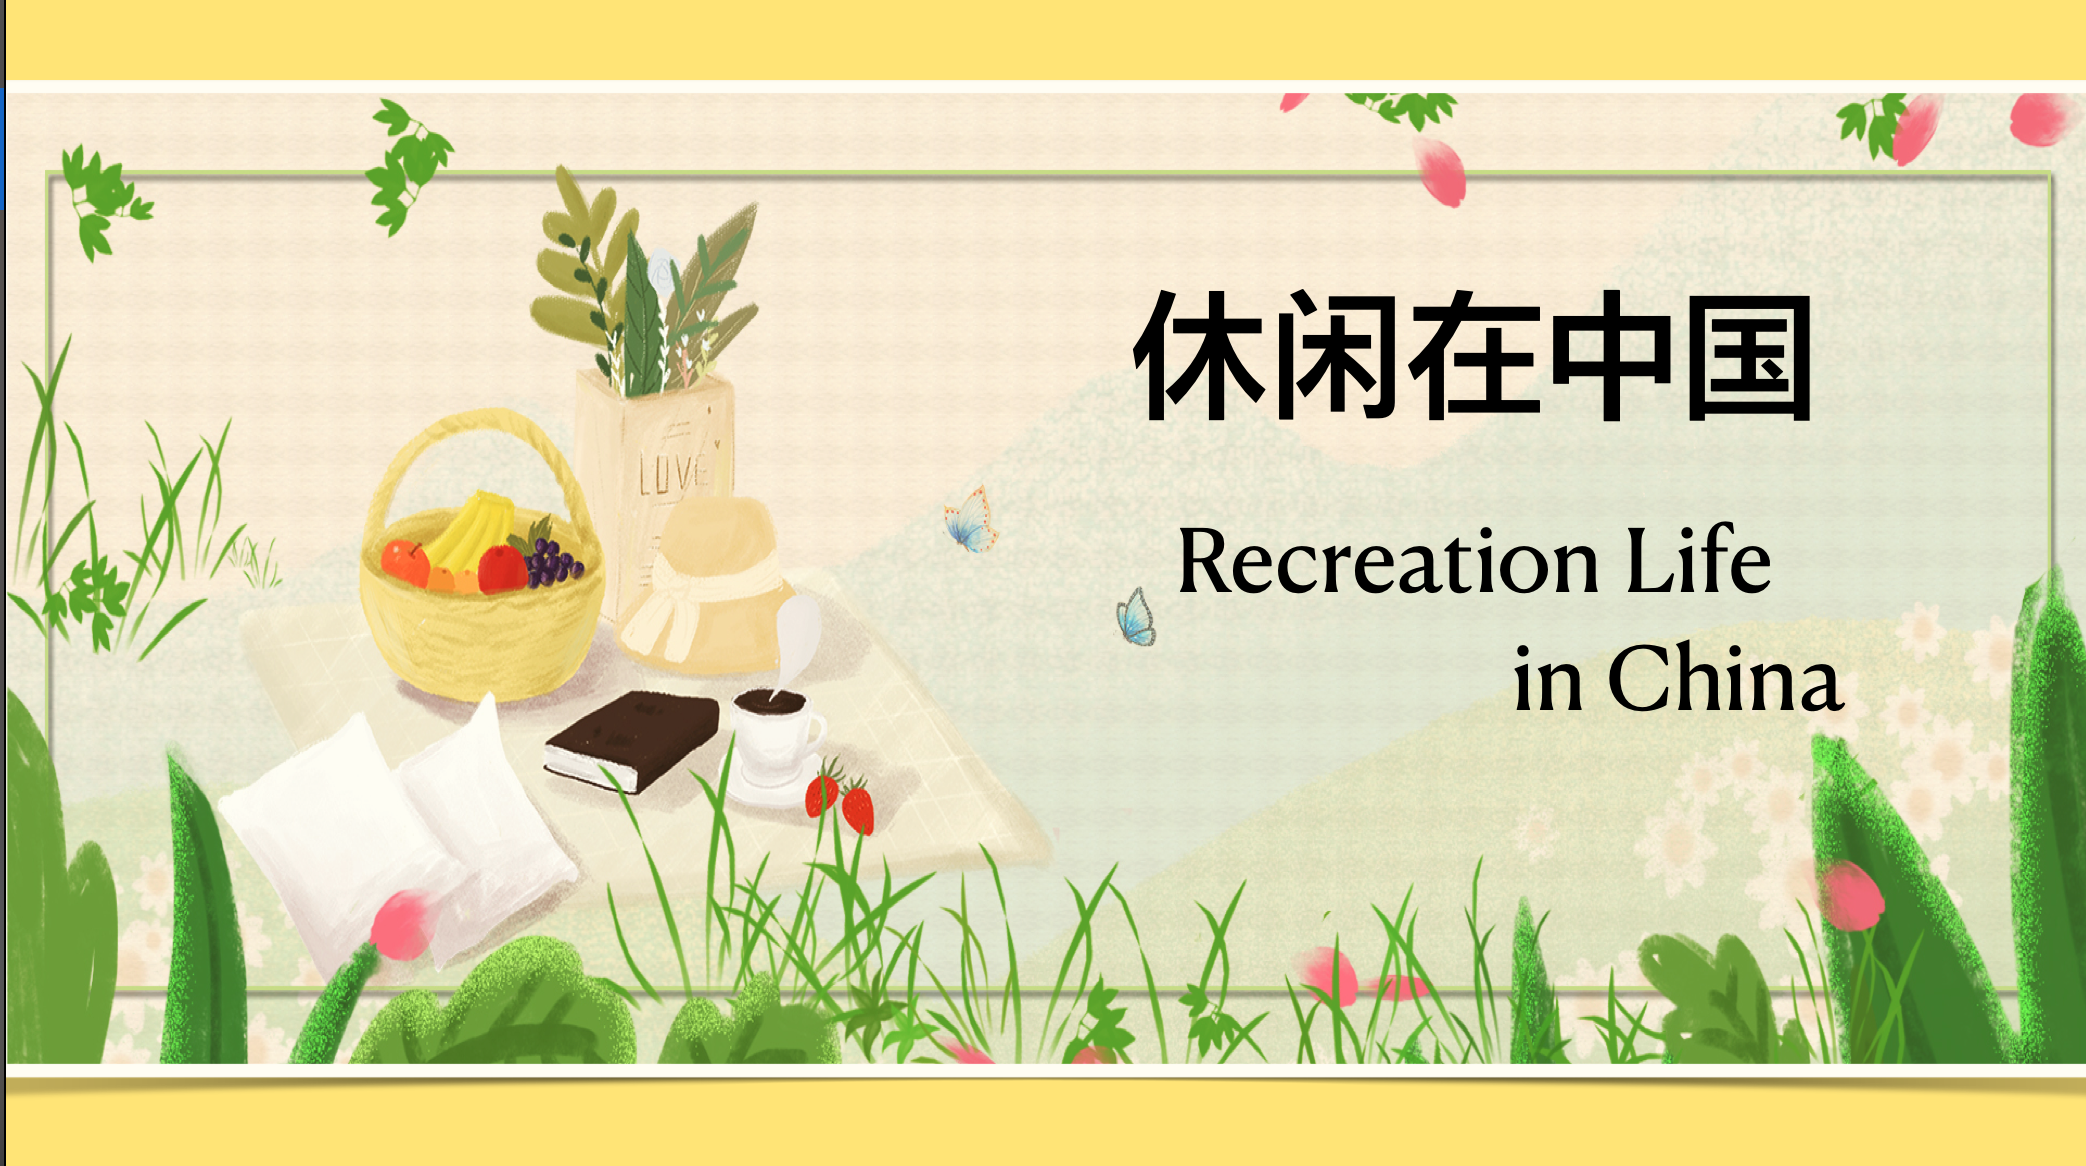 Recreation Life in China